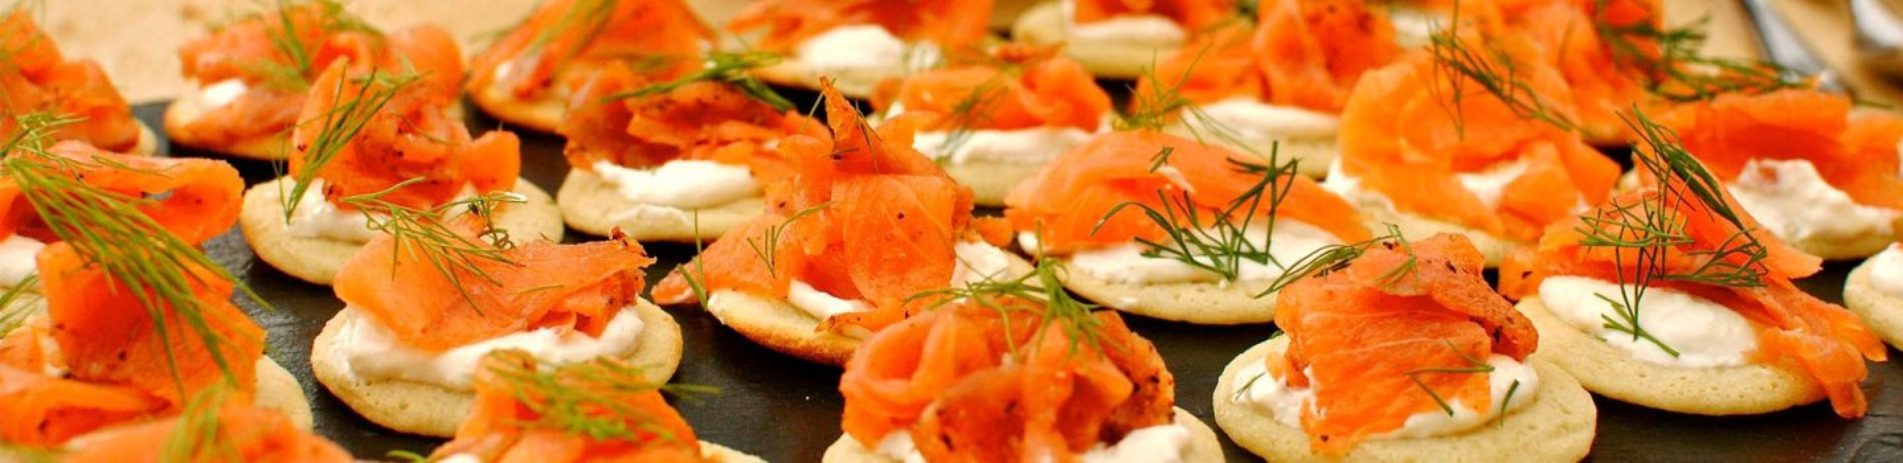 raw-salmon-and-dill-topping-oatcakes-on-platter